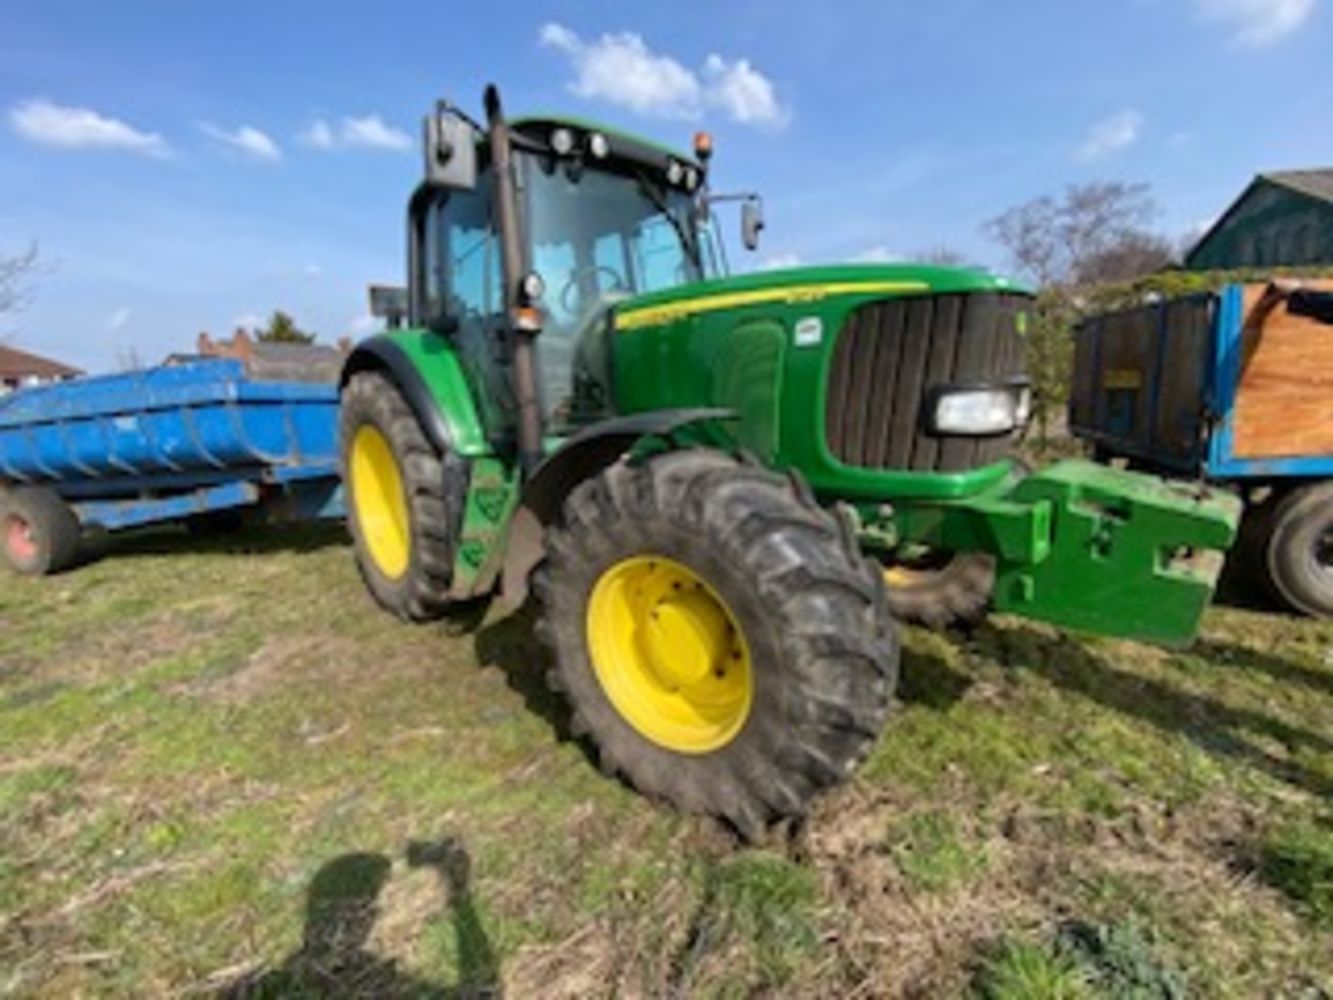 OFFSITE DISPERSAL AUCTION OF PLANT, AND AGRICULTURAL MACHINERY, TOOLS ETC AT HIGHWAY FARM, LIVERPOOL ROAD, LYDIATE, MERSEYSIDE L31 2ND